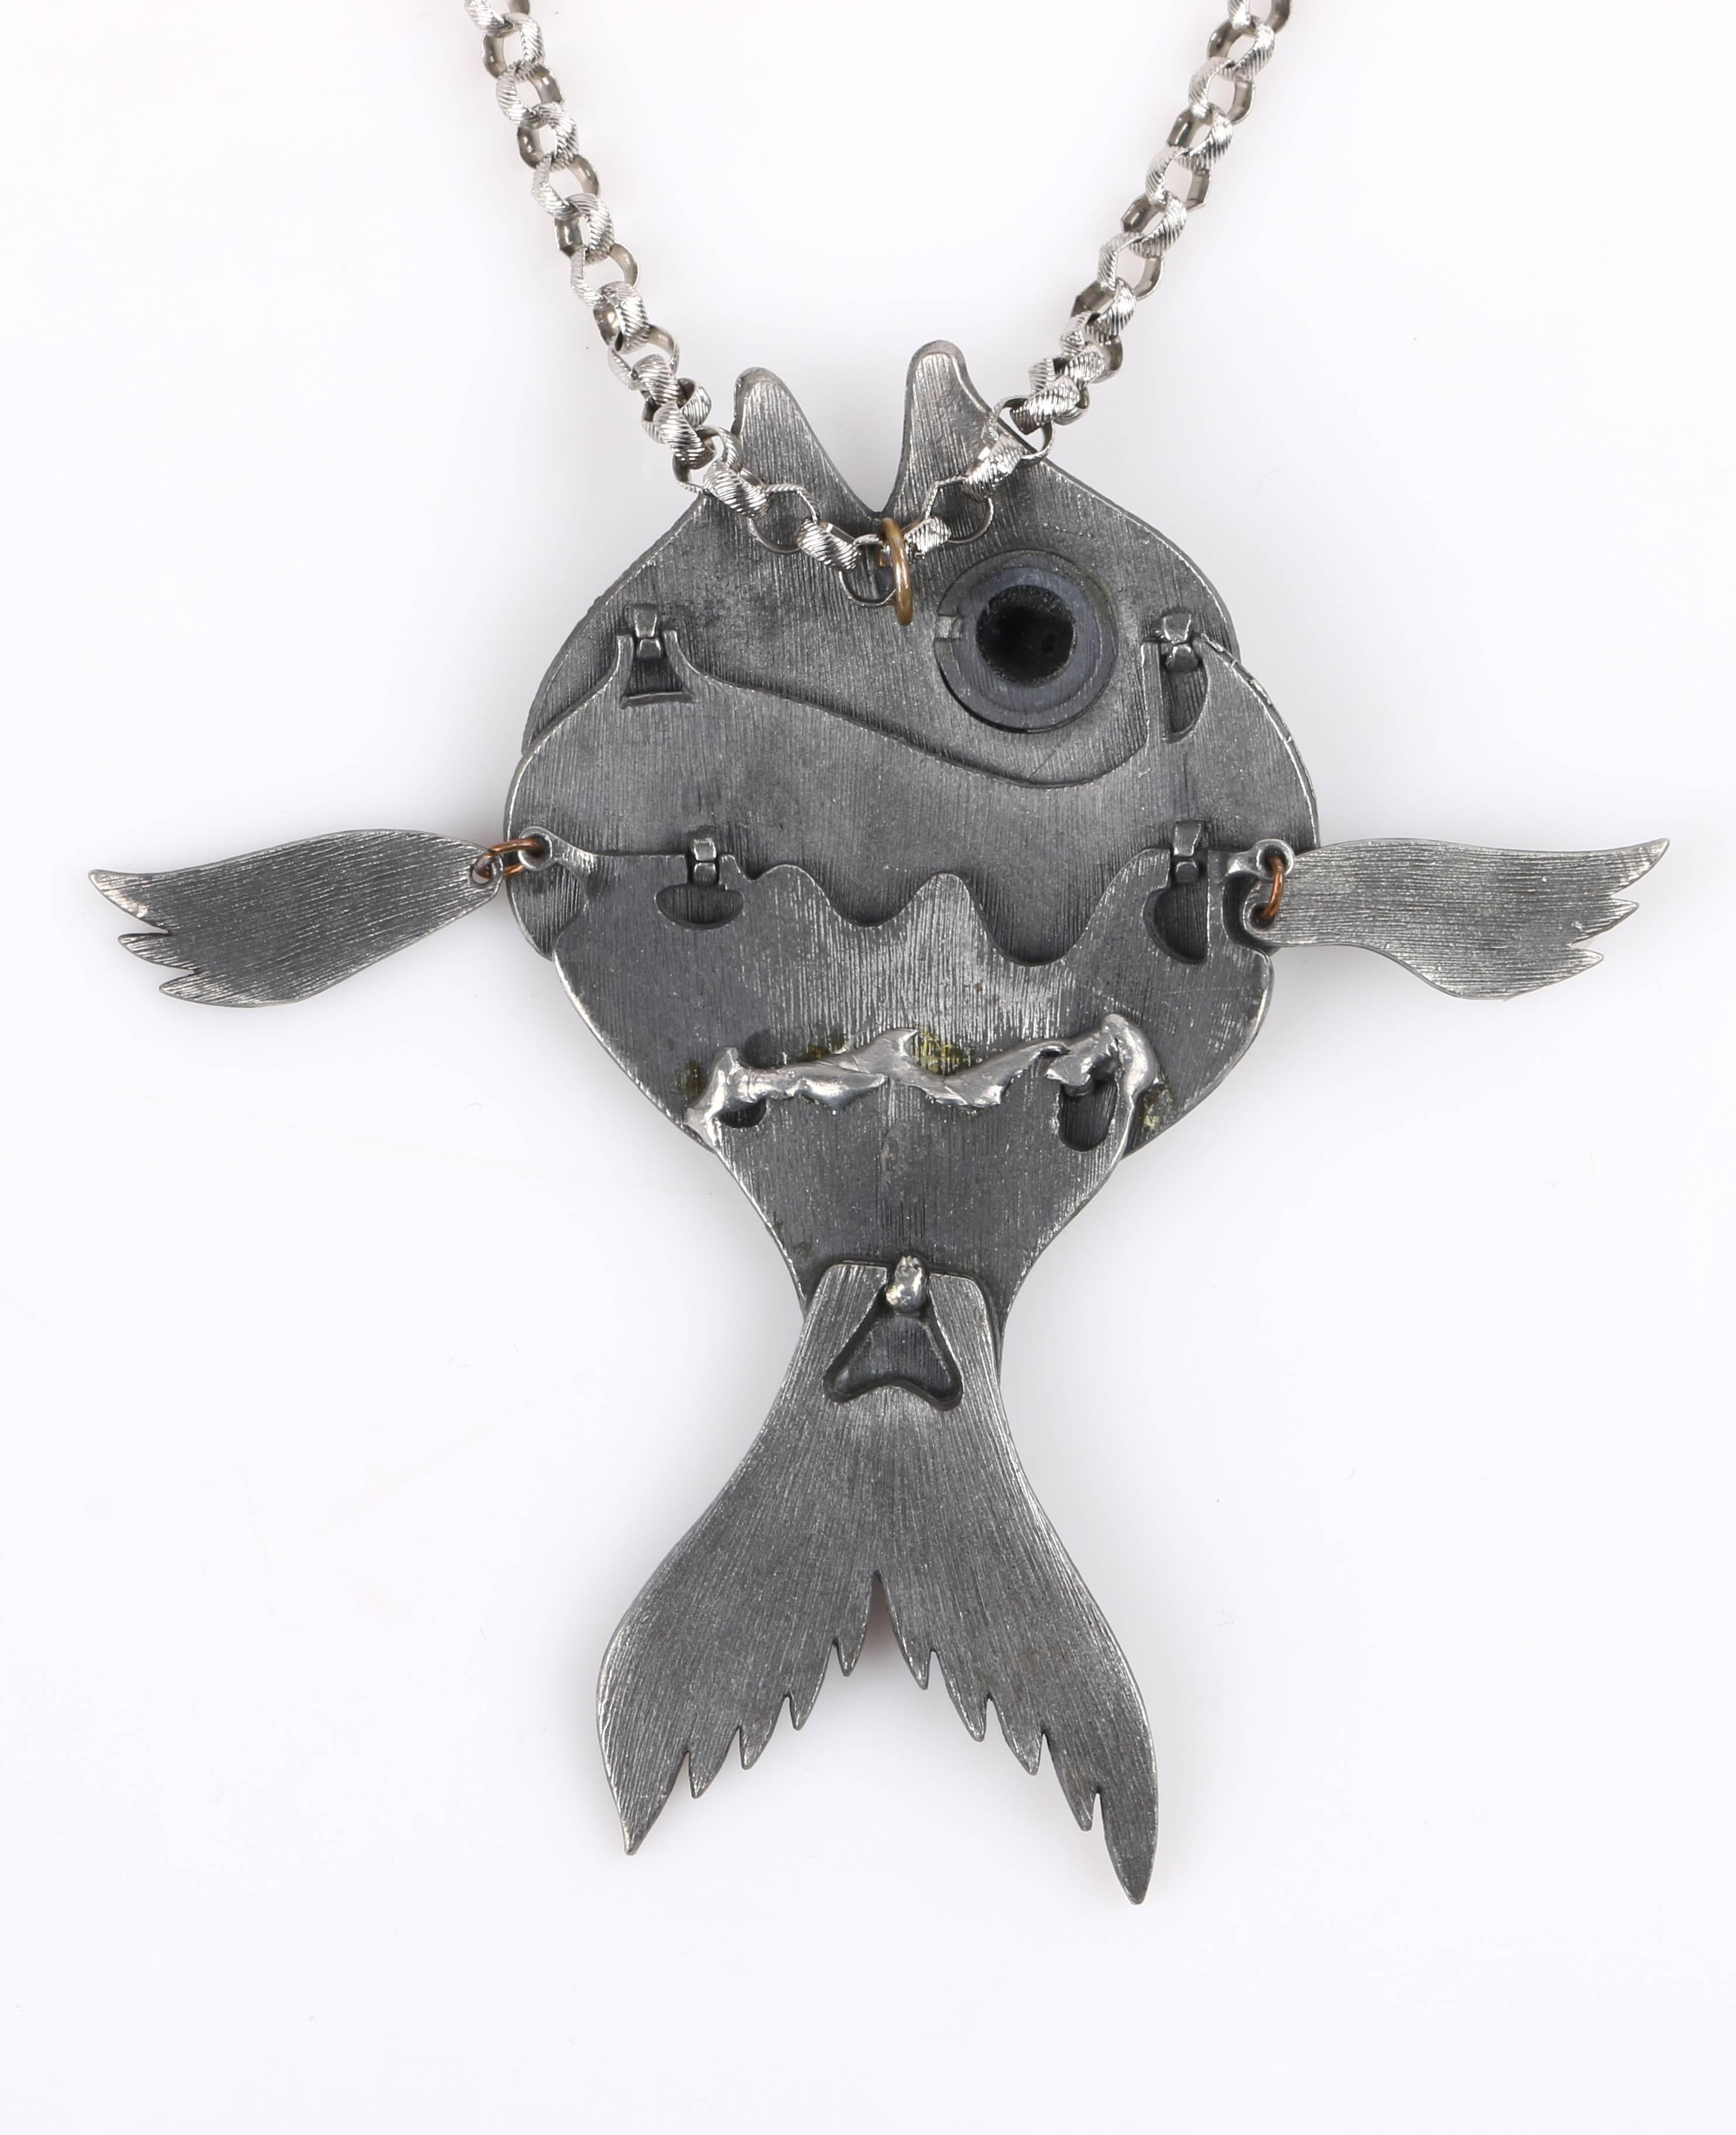 c.1960's Large Silver Articulated Fish Pendant Modernist Statement ...